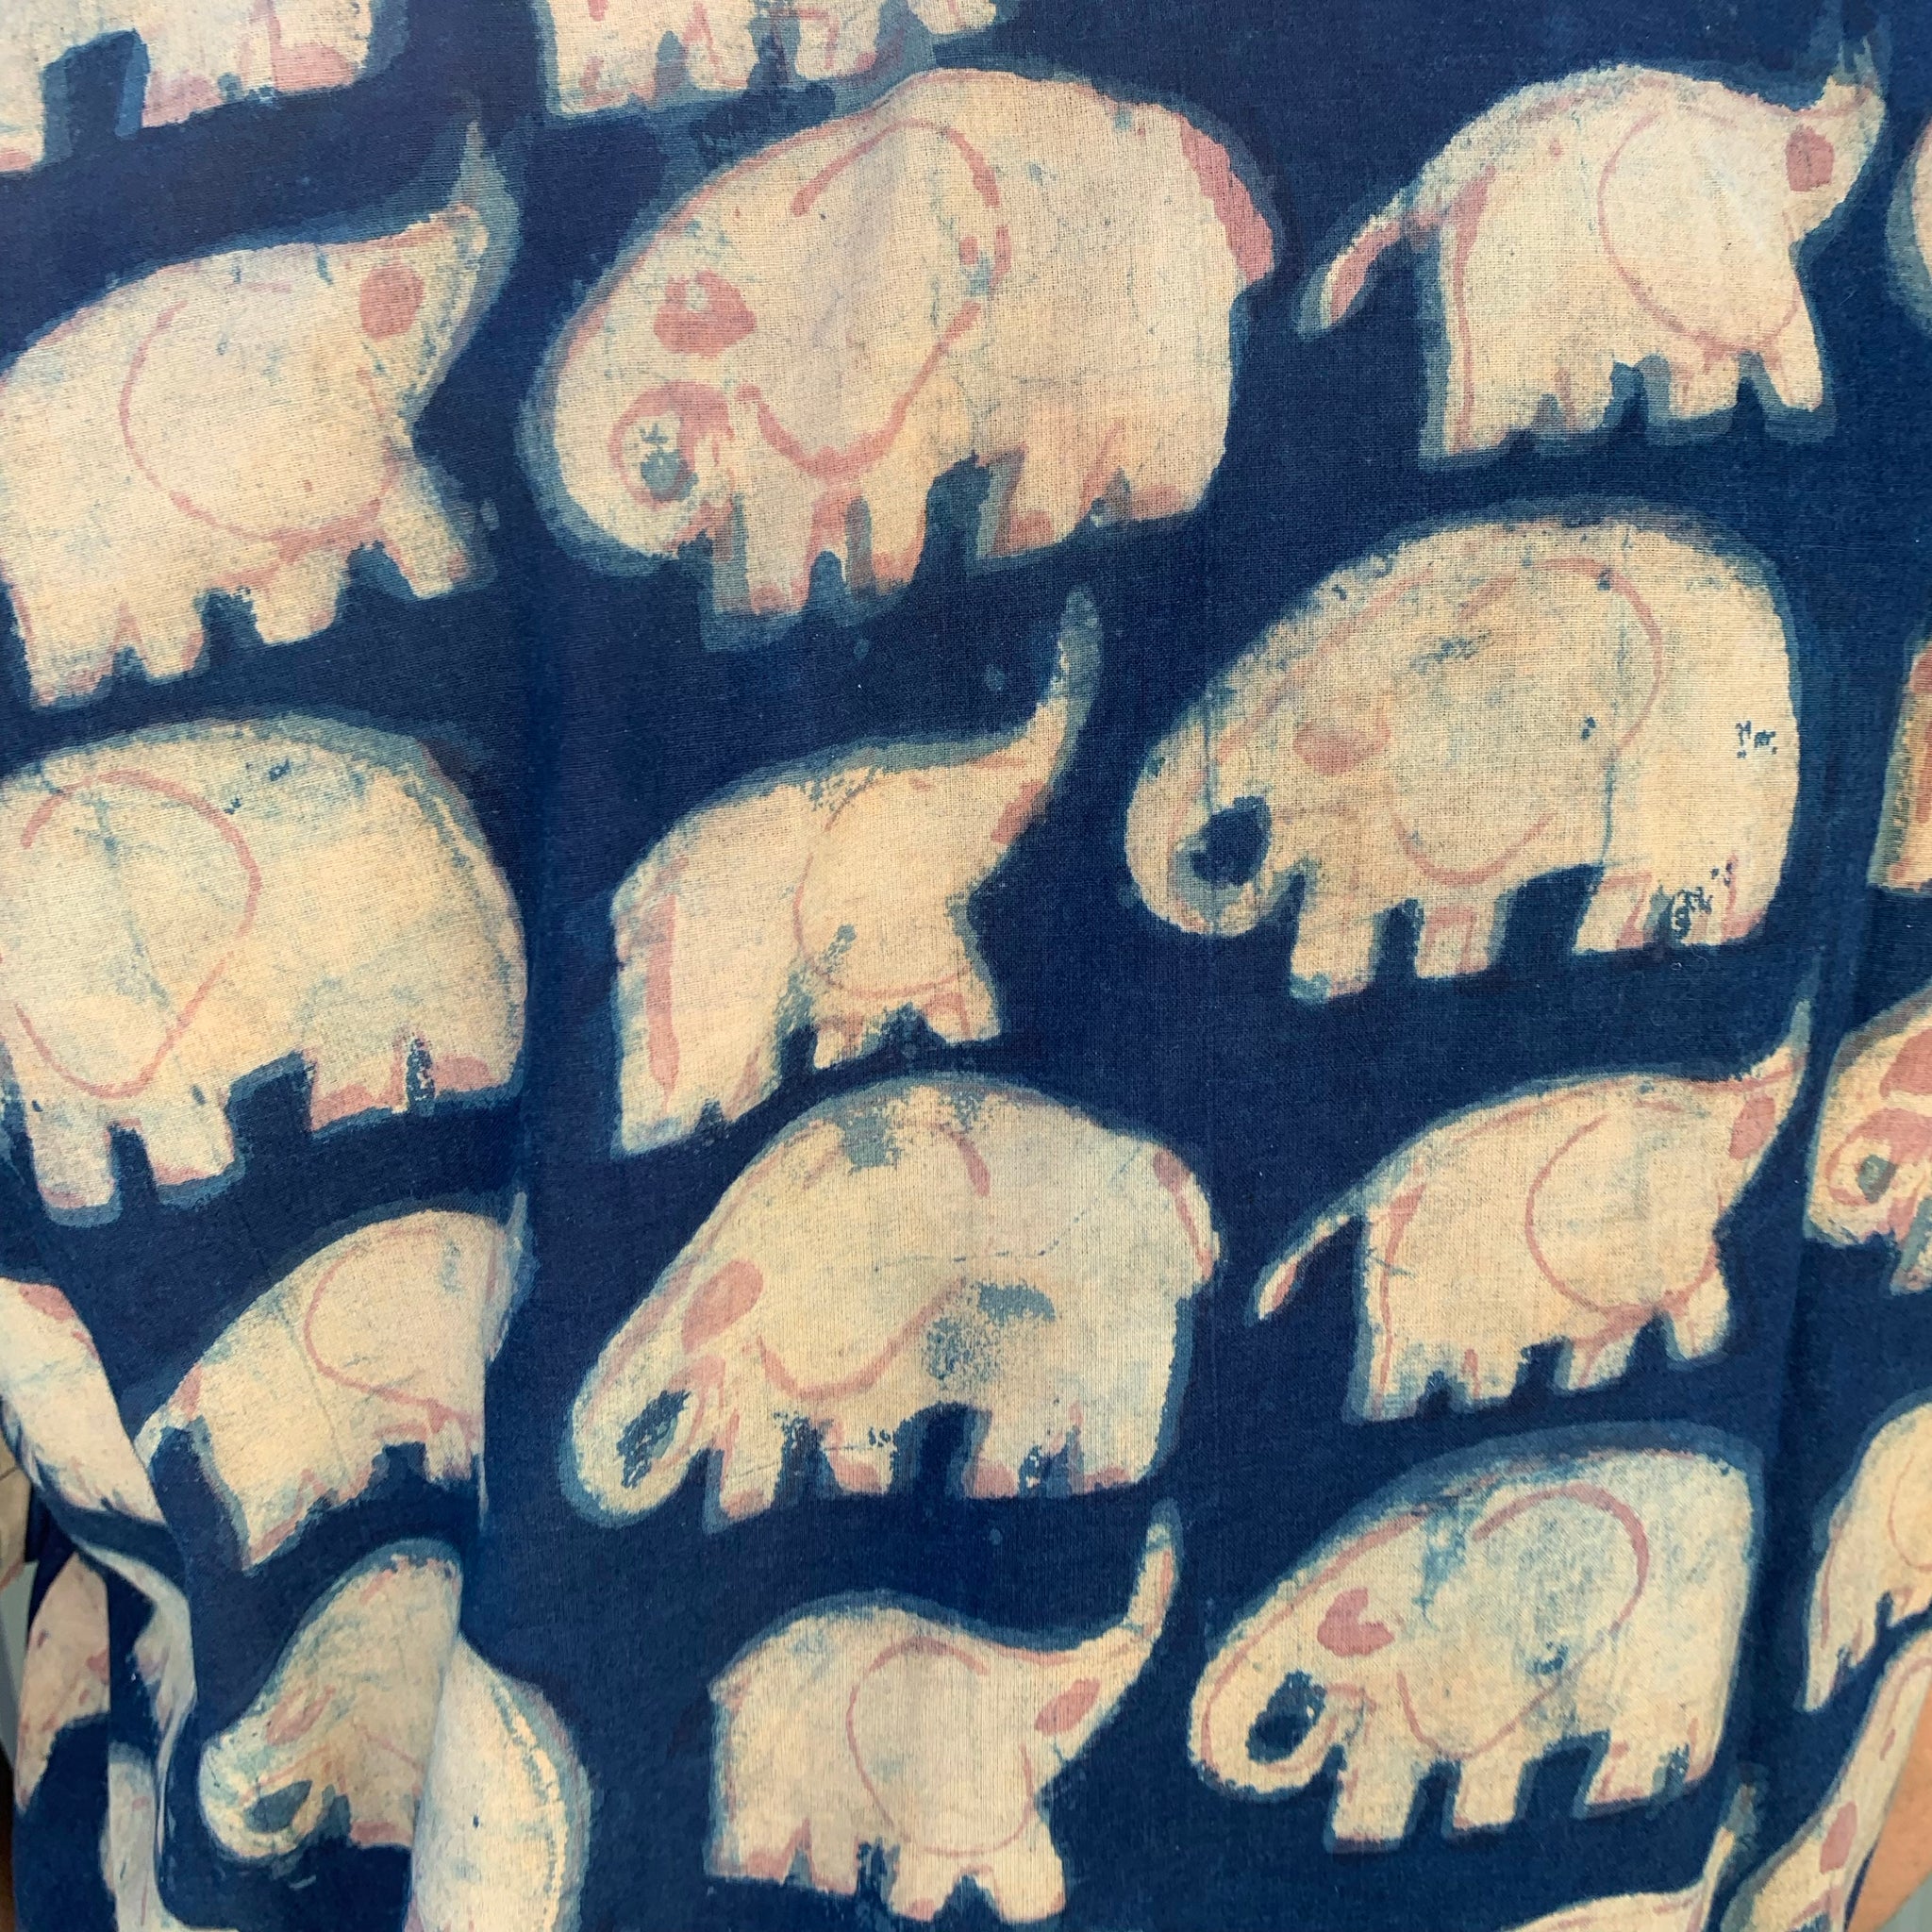 Fair Trade Ethical Mud Resistant Cotton Shirt in Elephant Design